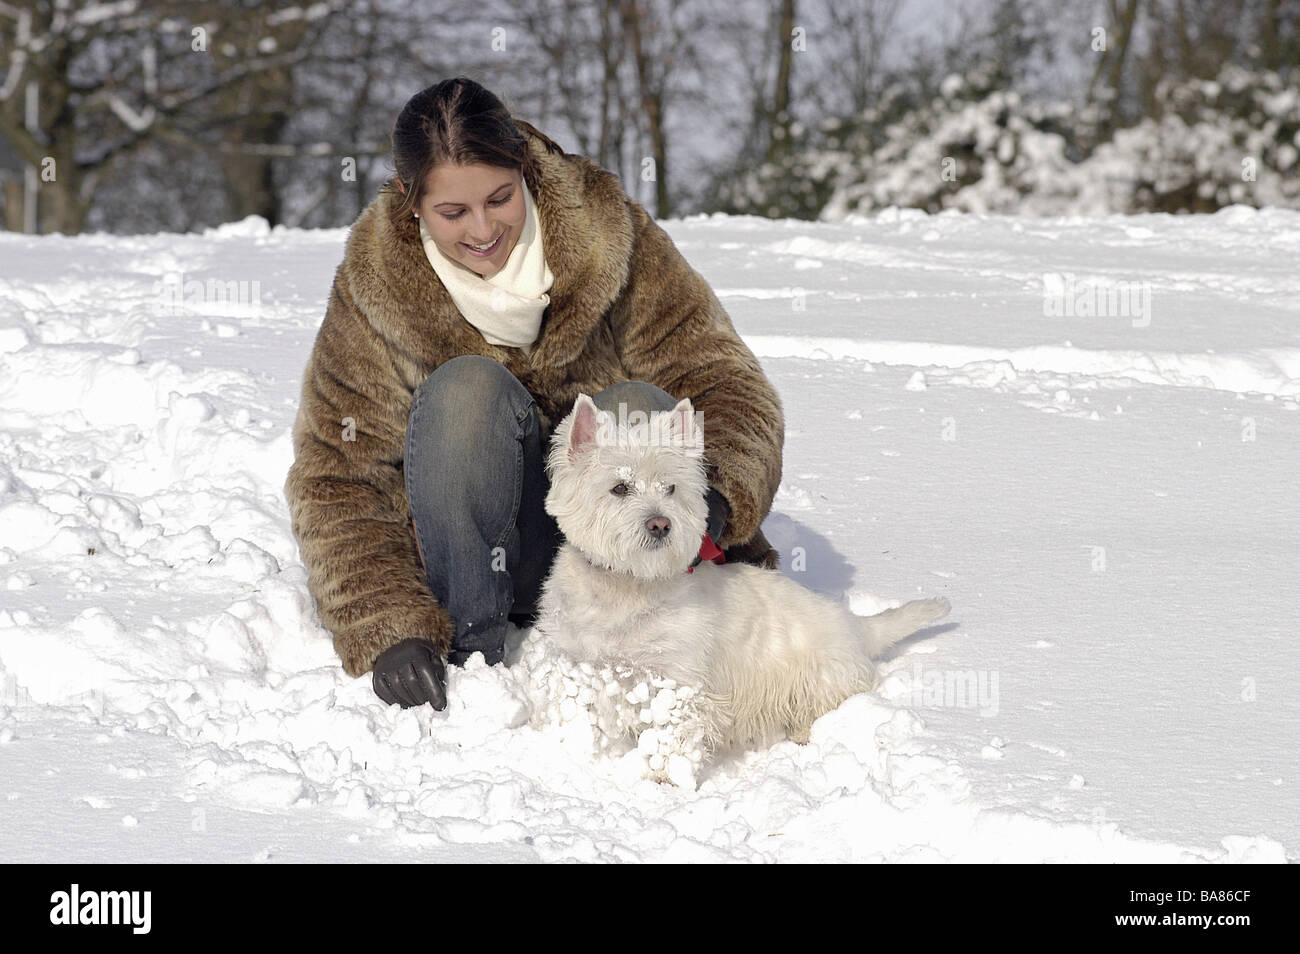 Woman with Westhighland White Terrier dog in snow Stock Photo